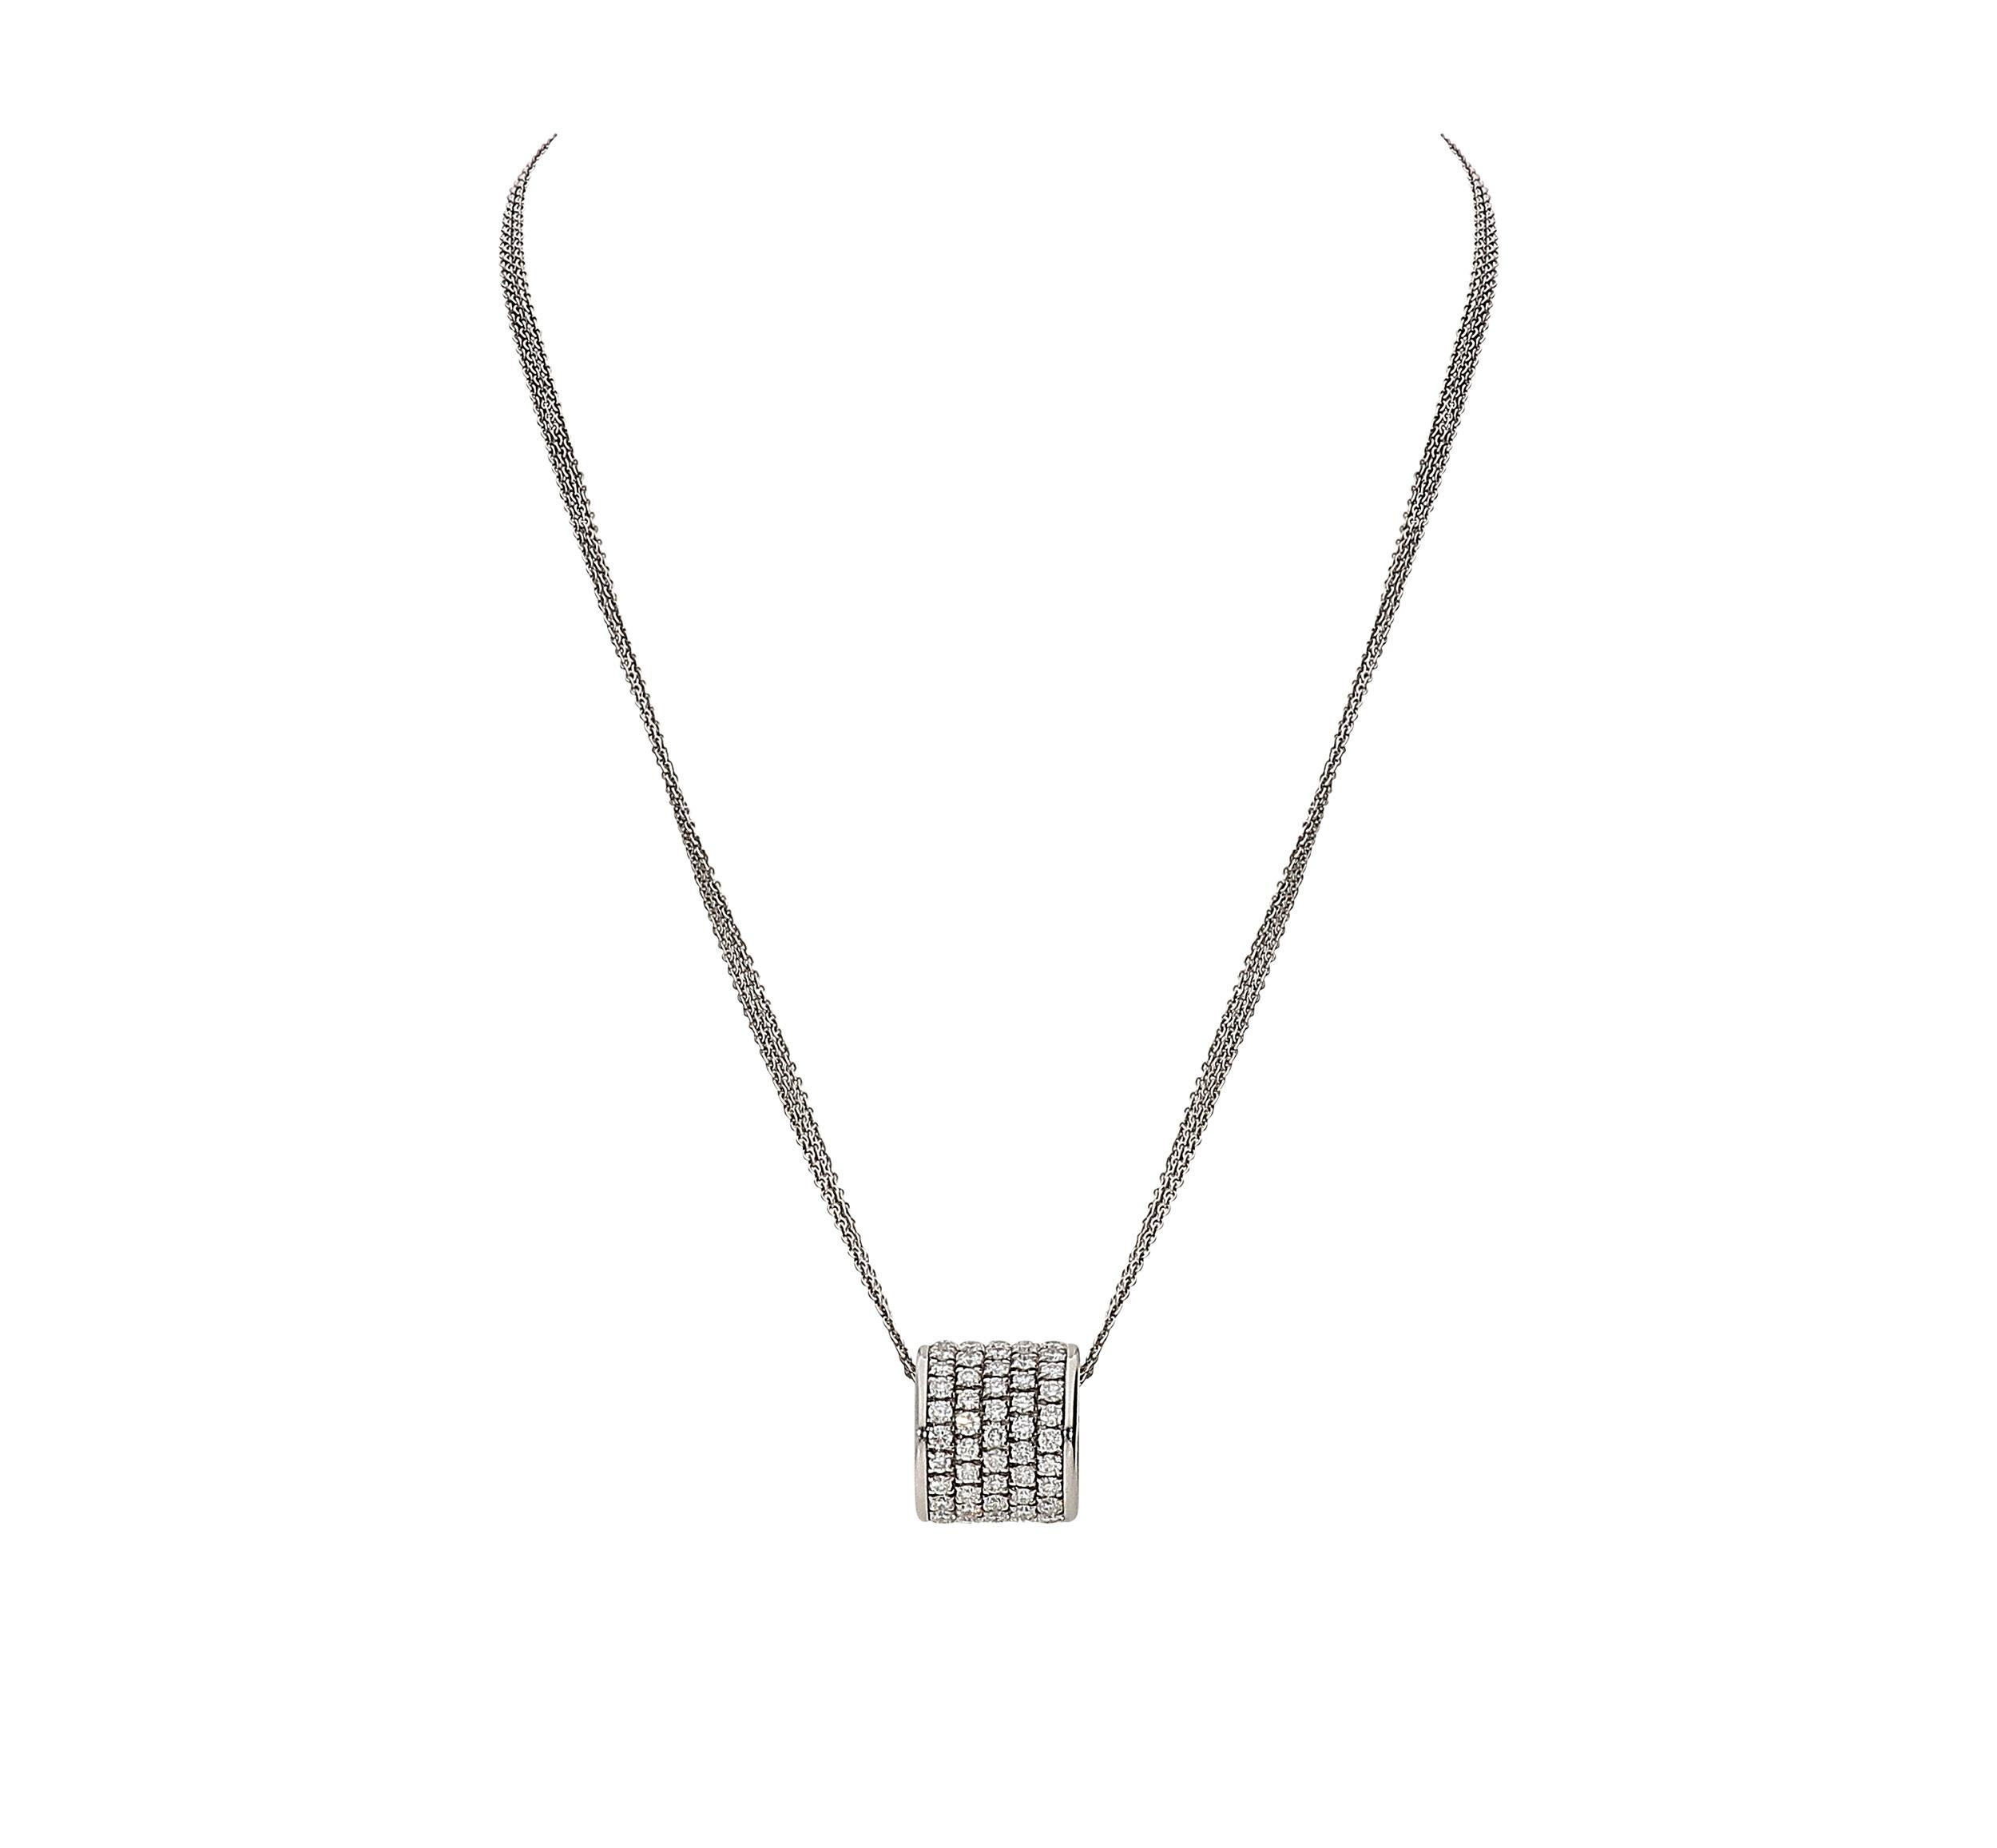 Shining round pendant with a 3 rows 42 centimeters chain in 18kt white gold for a total weight of 11,40 grams.
Diamonds are full set on 5 rows, color G clarity SI and 2,30 carats of weight.
The width of the pendant is 1,25 centimeters and the